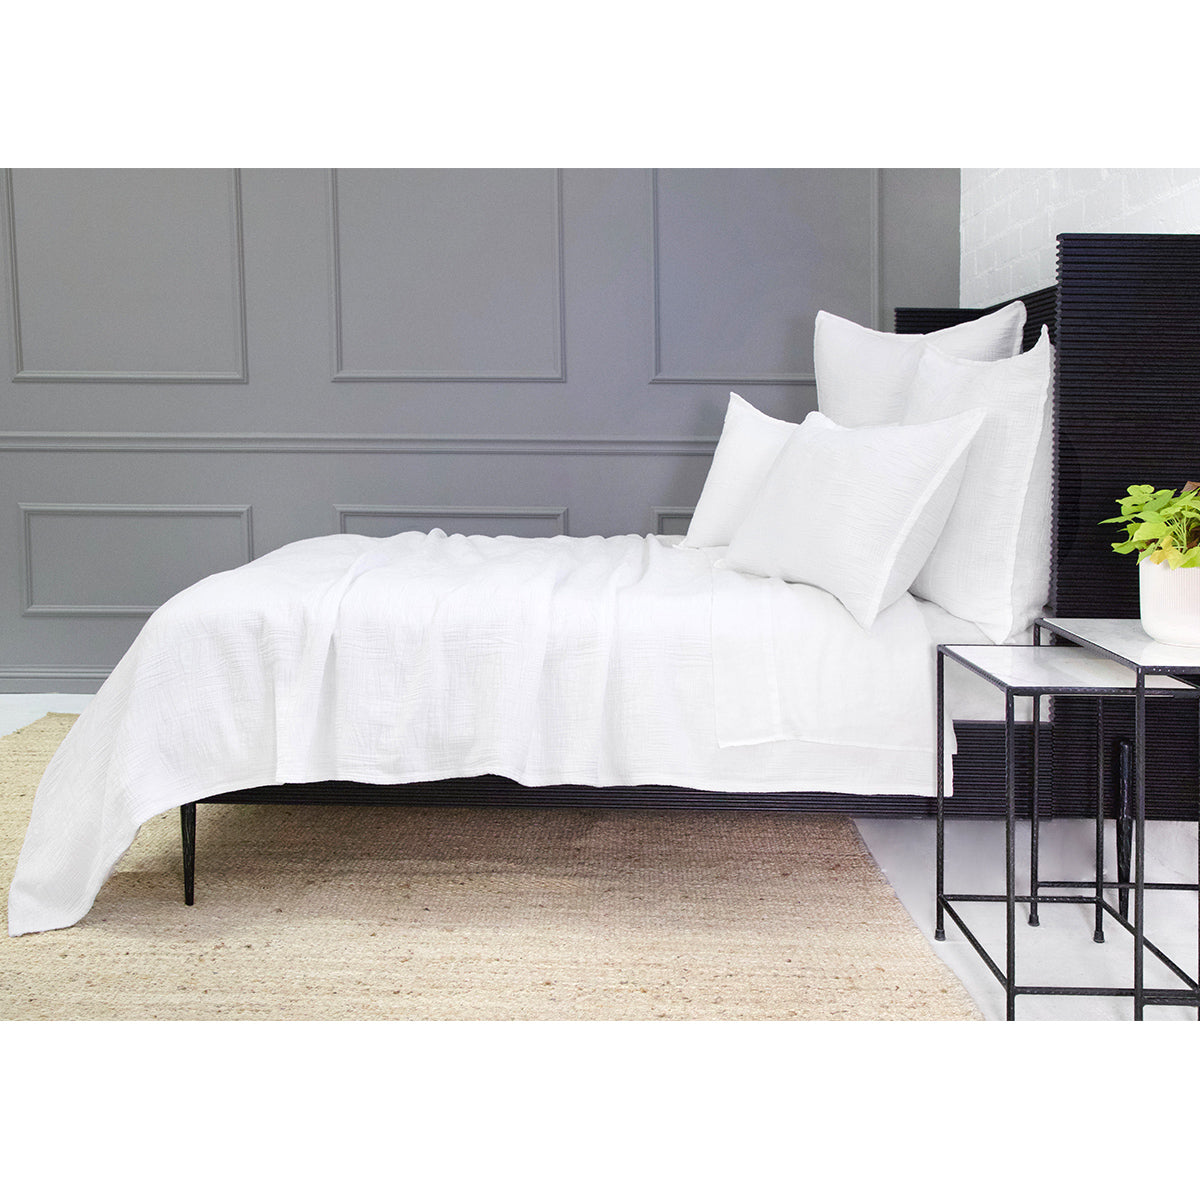 harbour matelasse collection - white color - coverlet - pom pom at home